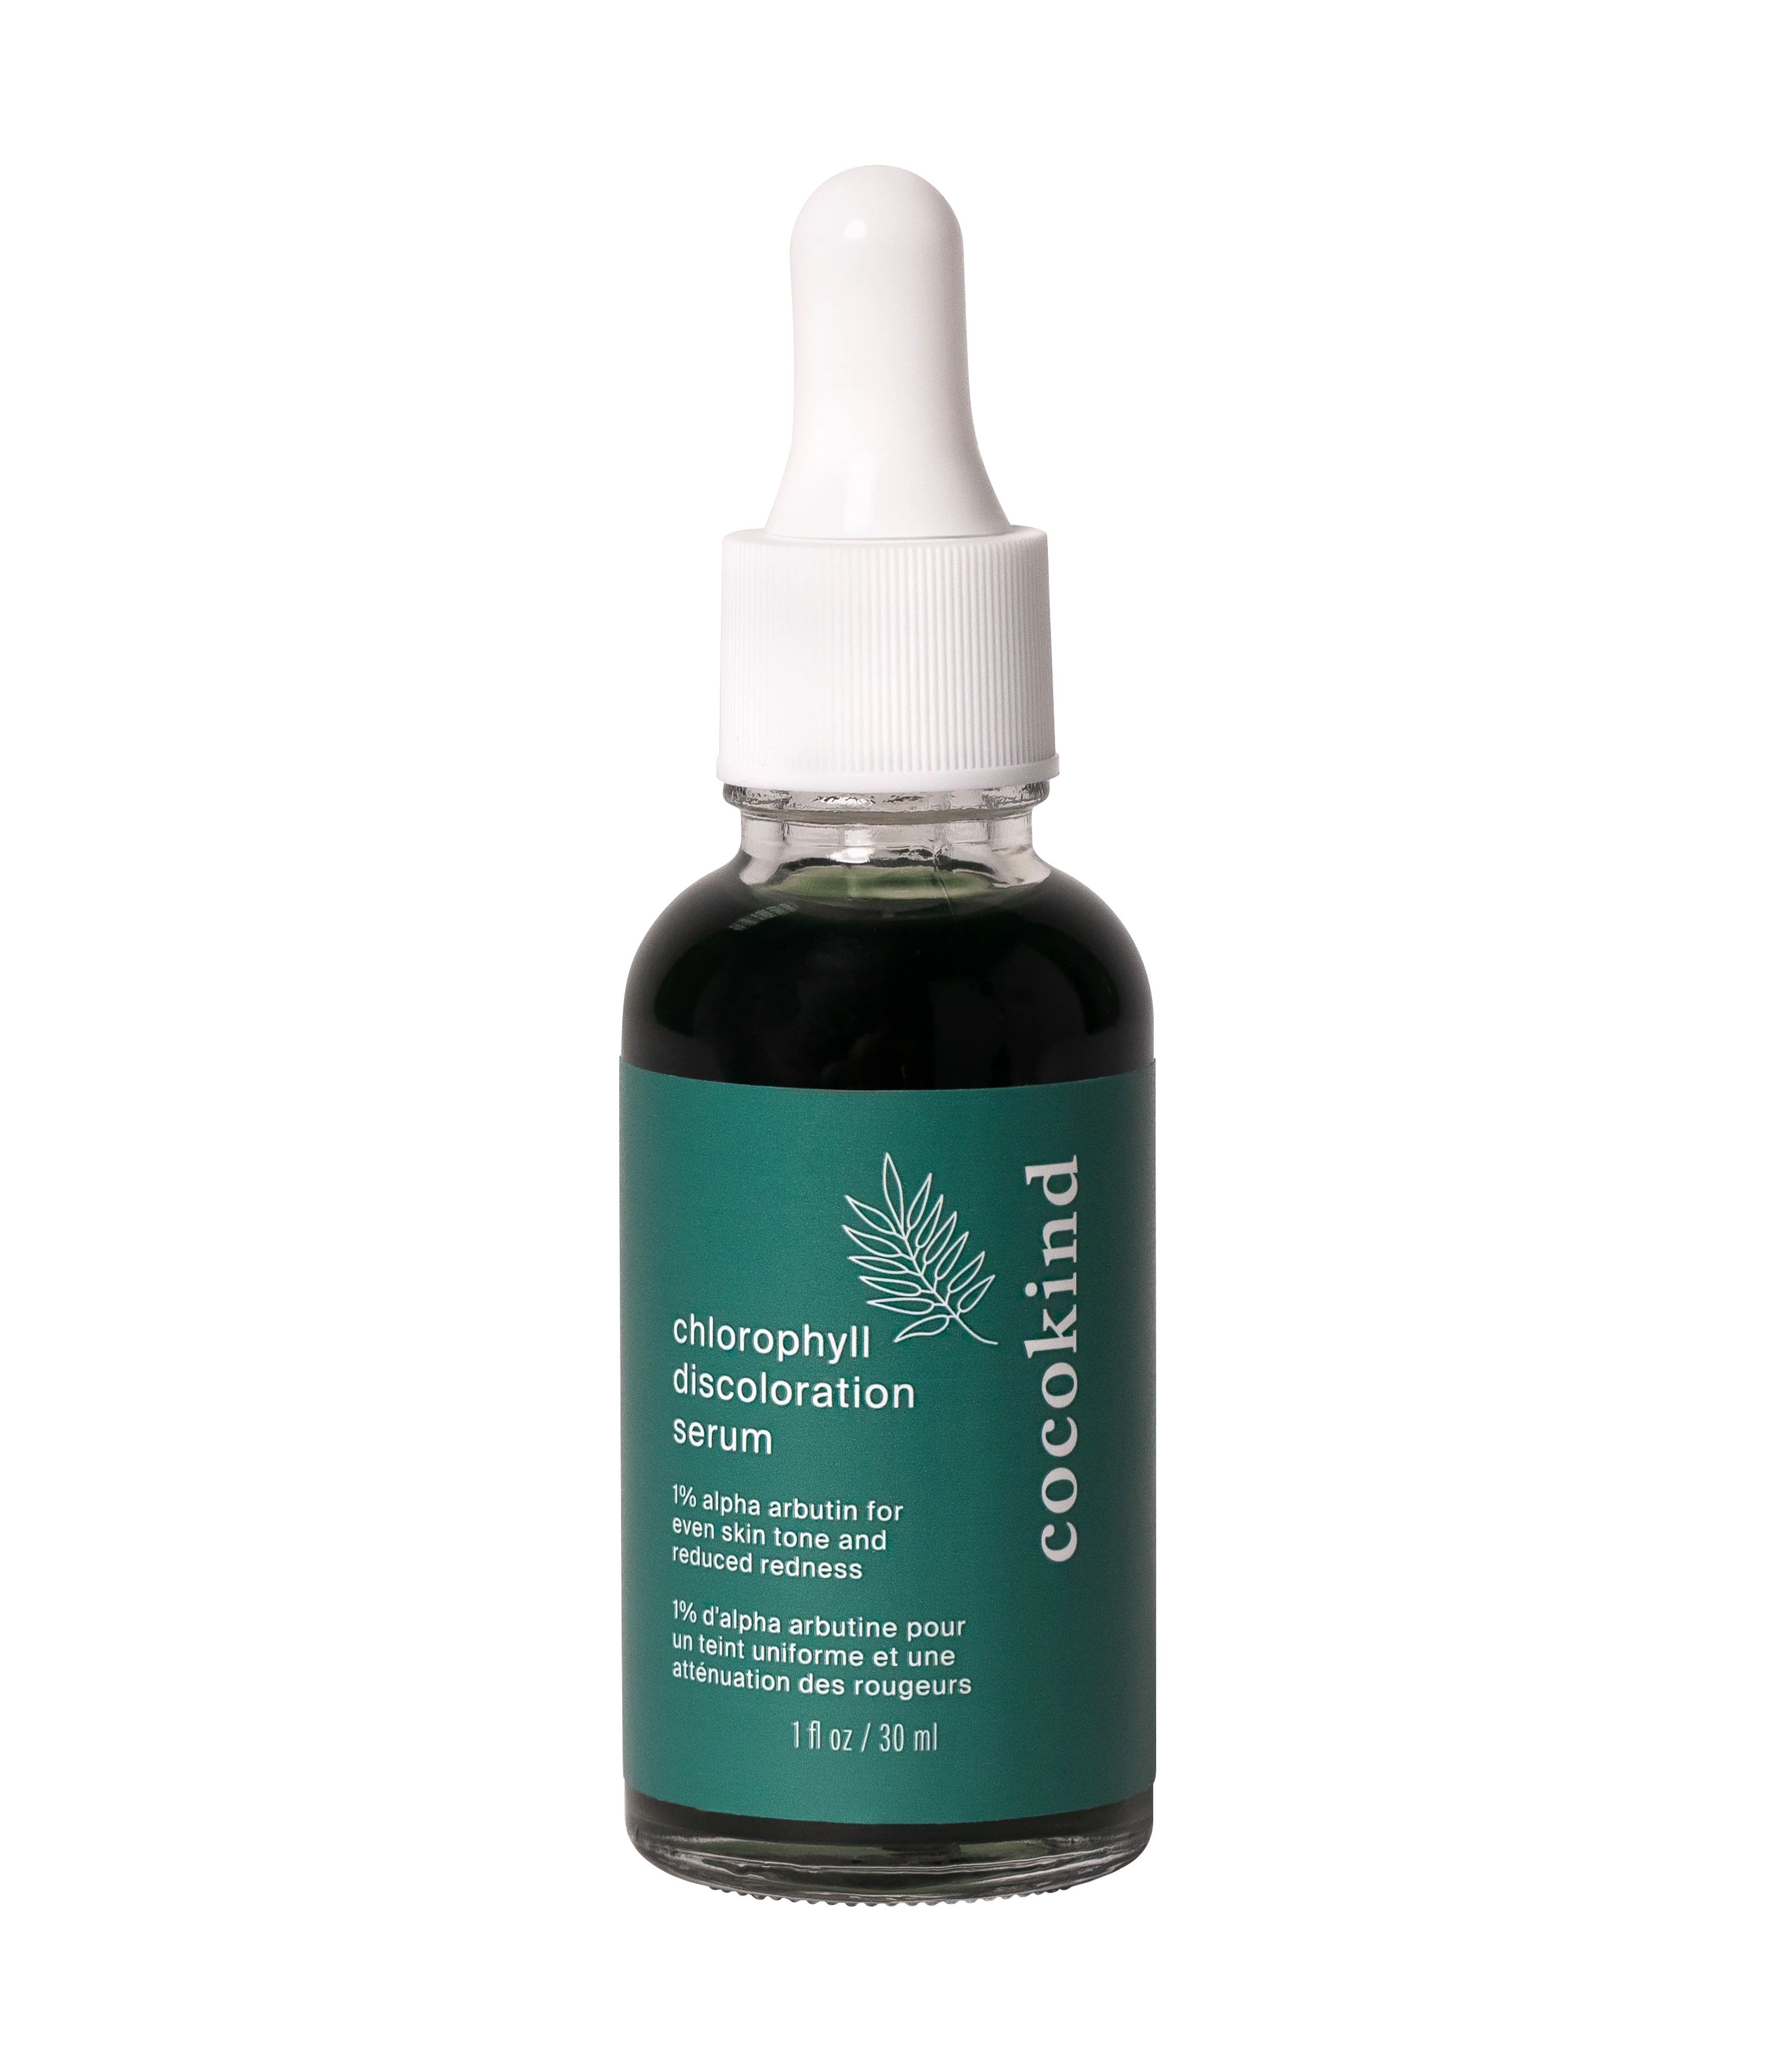 chlorophyll discoloration serum | Cocokind